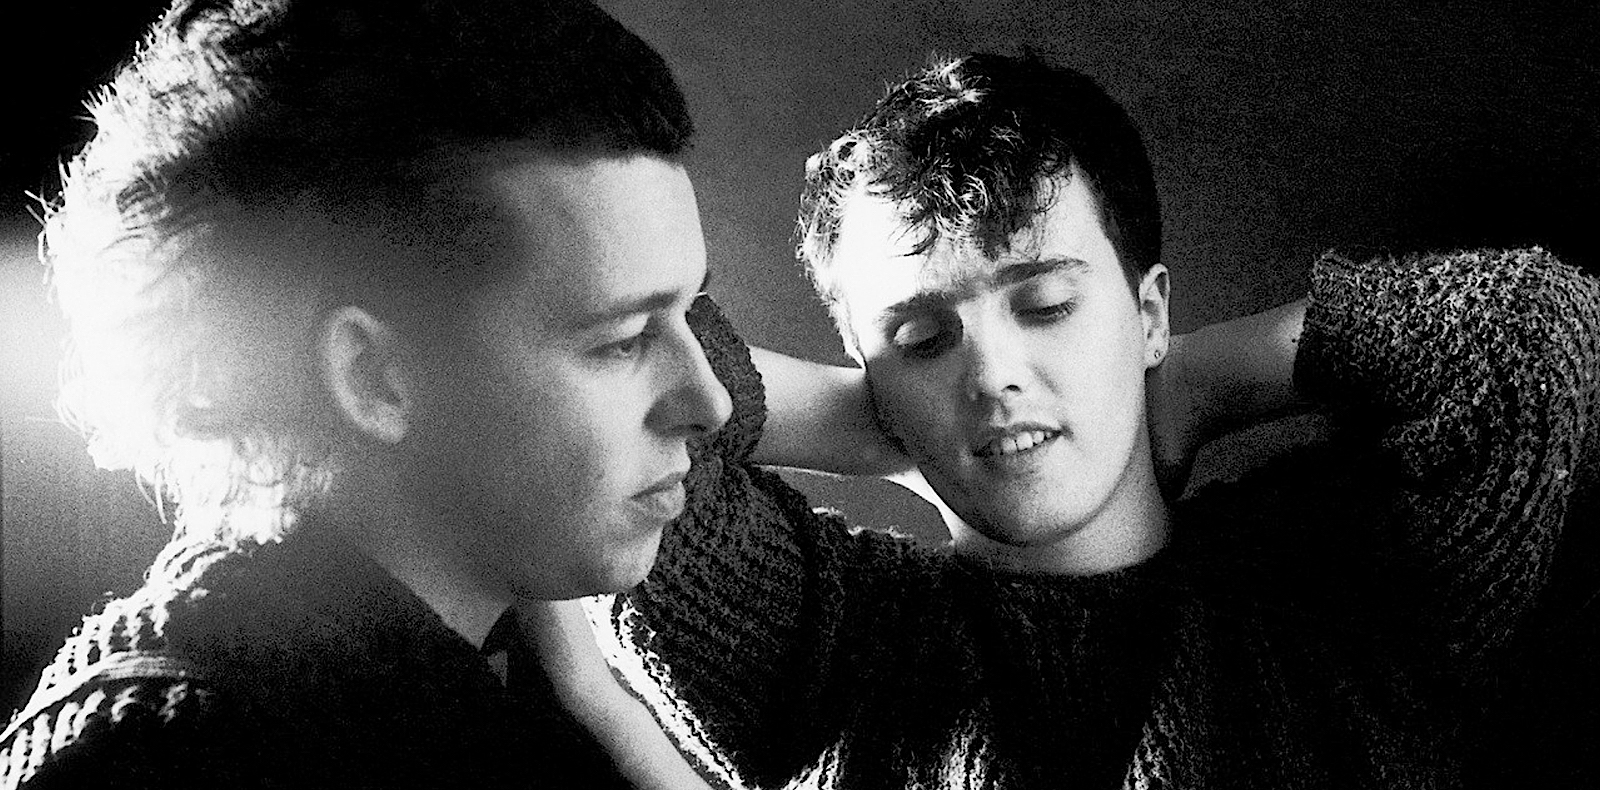 Tears for Fears' top five greatest hits - Derbyshire County Cricket Club